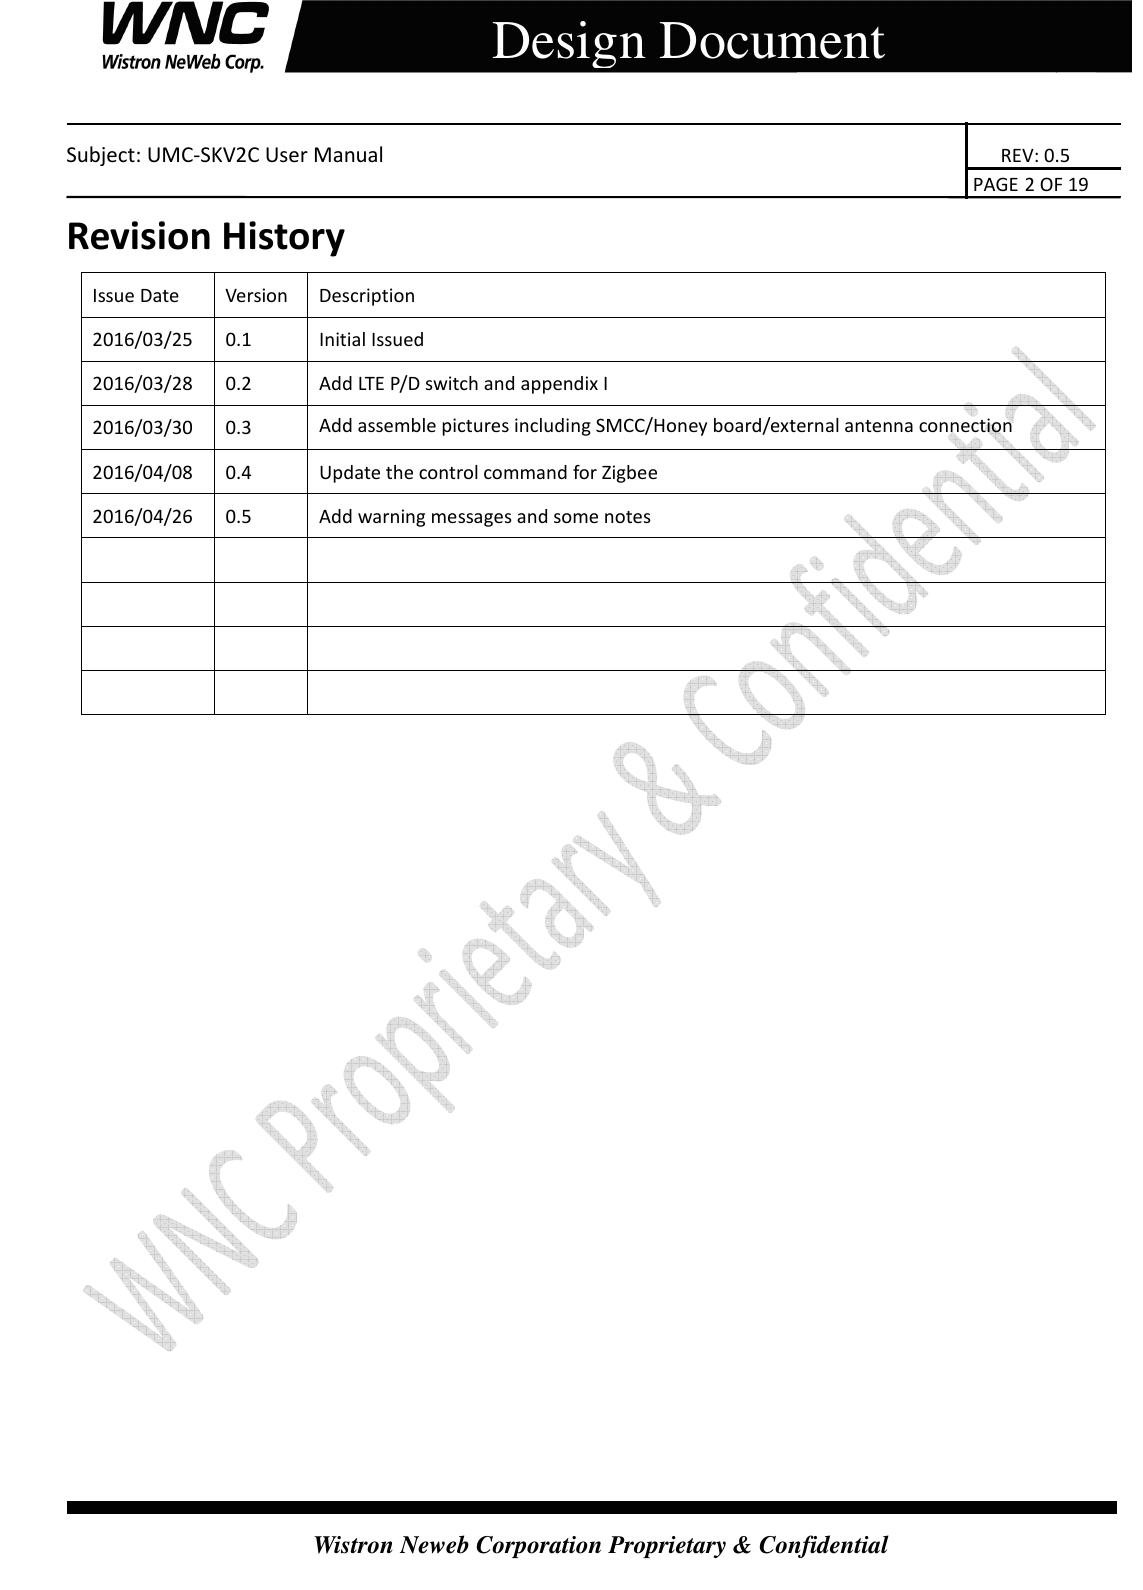    Subject: UMC-SKV2C User Manual                                                                       REV: 0.5                                                                                                                                                                               PAGE 2 OF 19  Wistron Neweb Corporation Proprietary &amp; Confidential     Design Document Revision History Issue Date  Version  Description 2016/03/25  0.1  Initial Issued 2016/03/28  0.2  Add LTE P/D switch and appendix I 2016/03/30  0.3  Add assemble pictures including SMCC/Honey board/external antenna connection 2016/04/08  0.4  Update the control command for Zigbee 2016/04/26  0.5  Add warning messages and some notes                                       